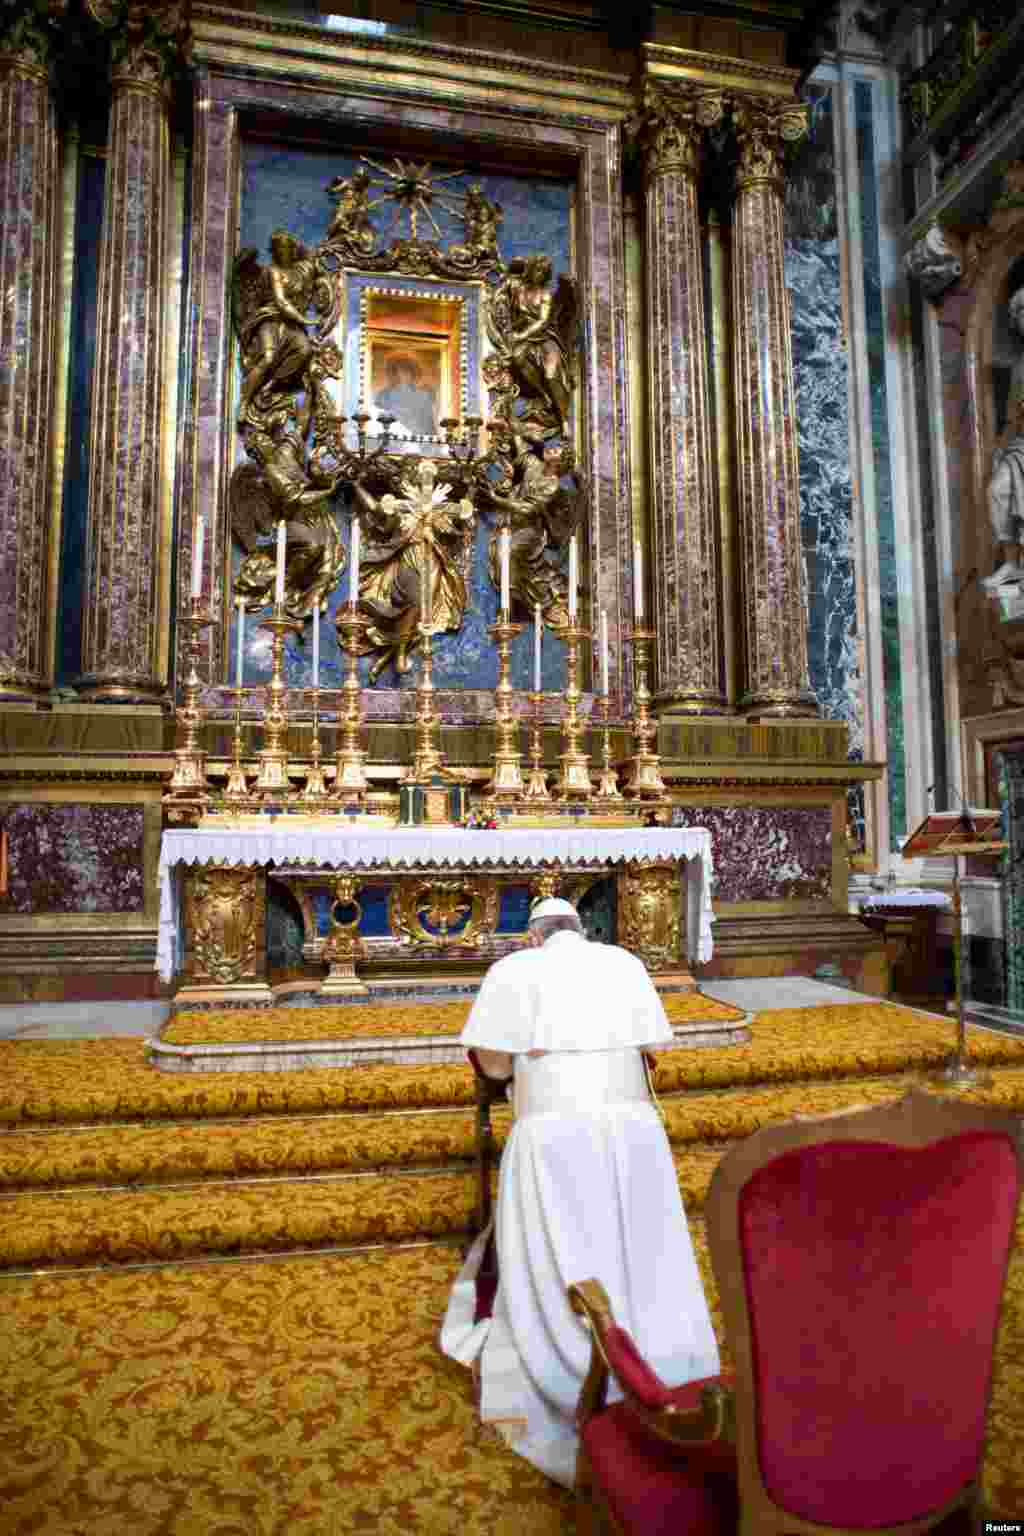 Newly elected Pope Francis prays before an icon of Mary during a private visit to the Basilica of Santa Maria Maggiore, in a photo released by Osservatore Romano in Rome, March 14, 2013. 